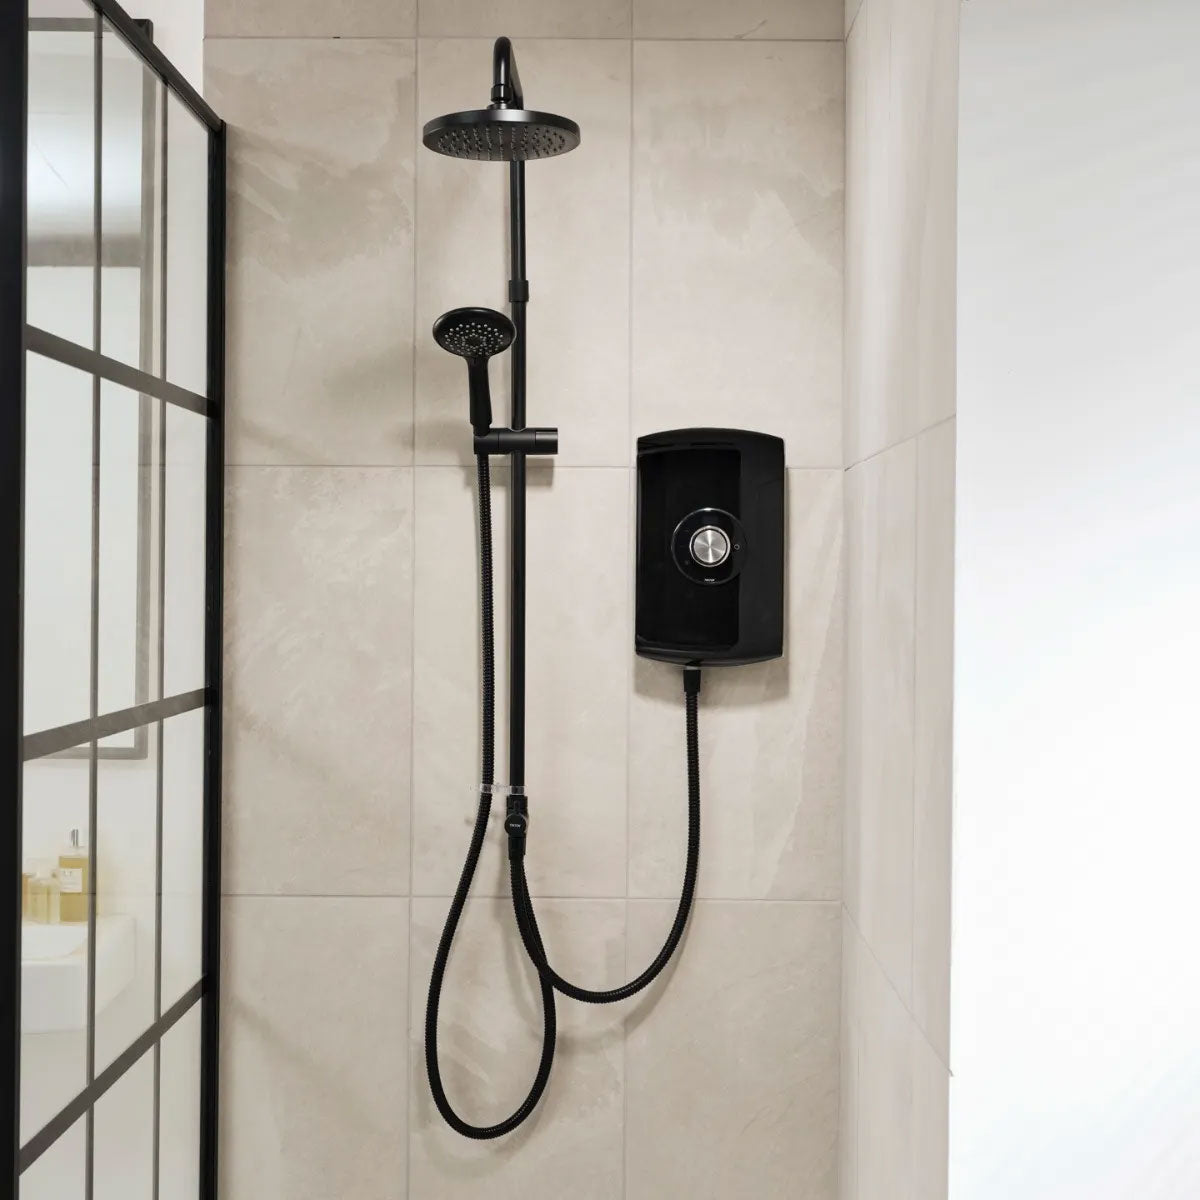 Triton Amore 9.5kW DuElec Electric Shower with Overhead and Sliding Handset - Gloss Black